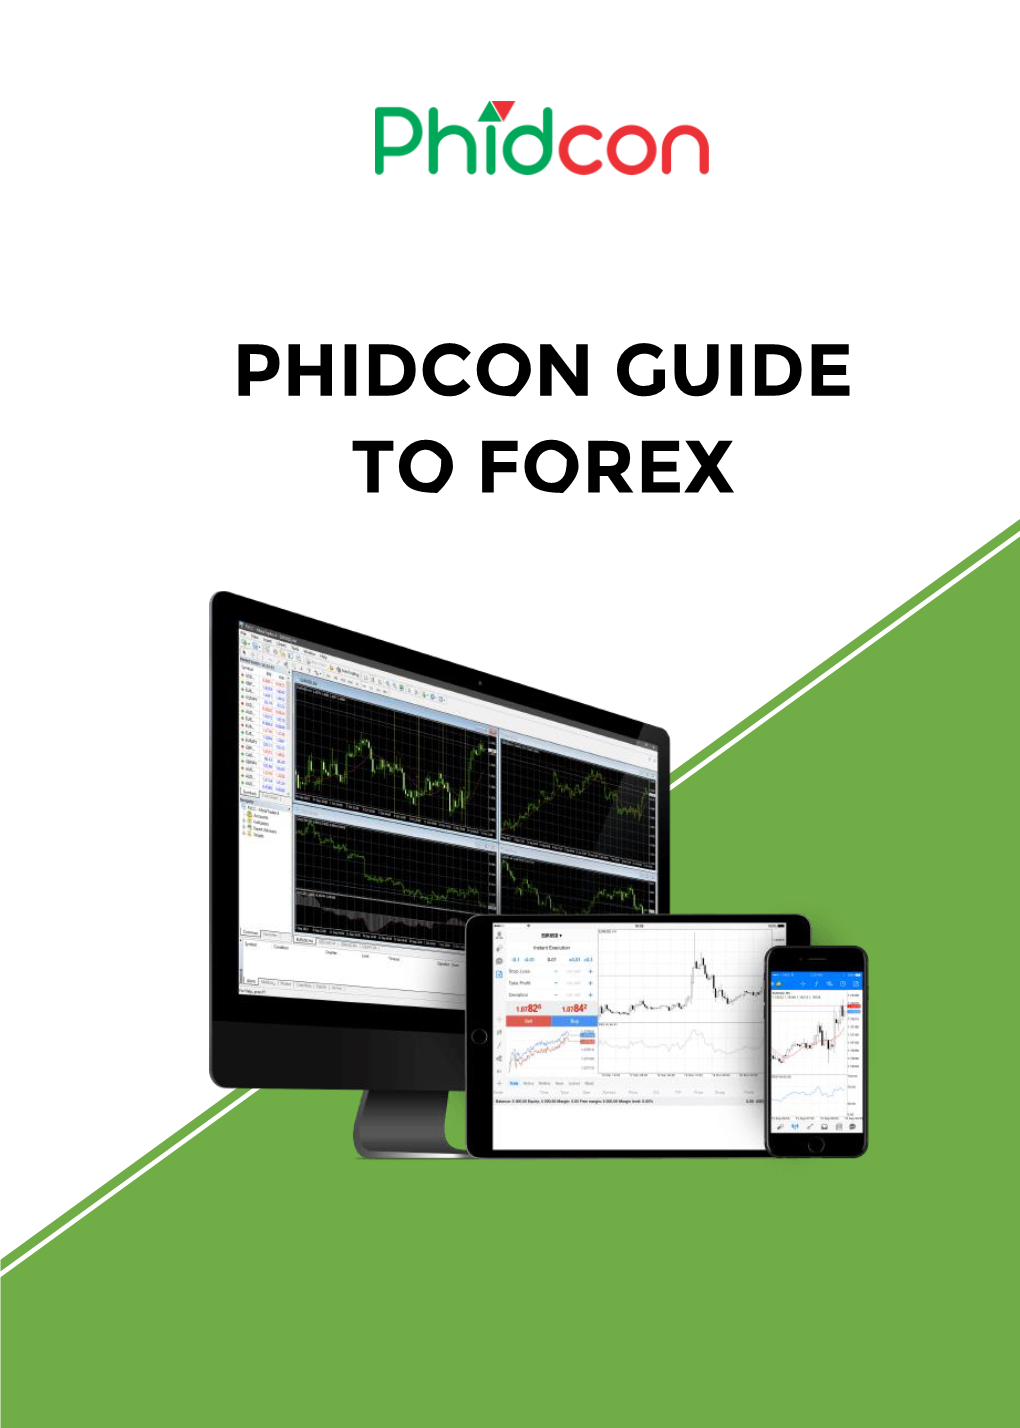 Phidcon Guide to Forex